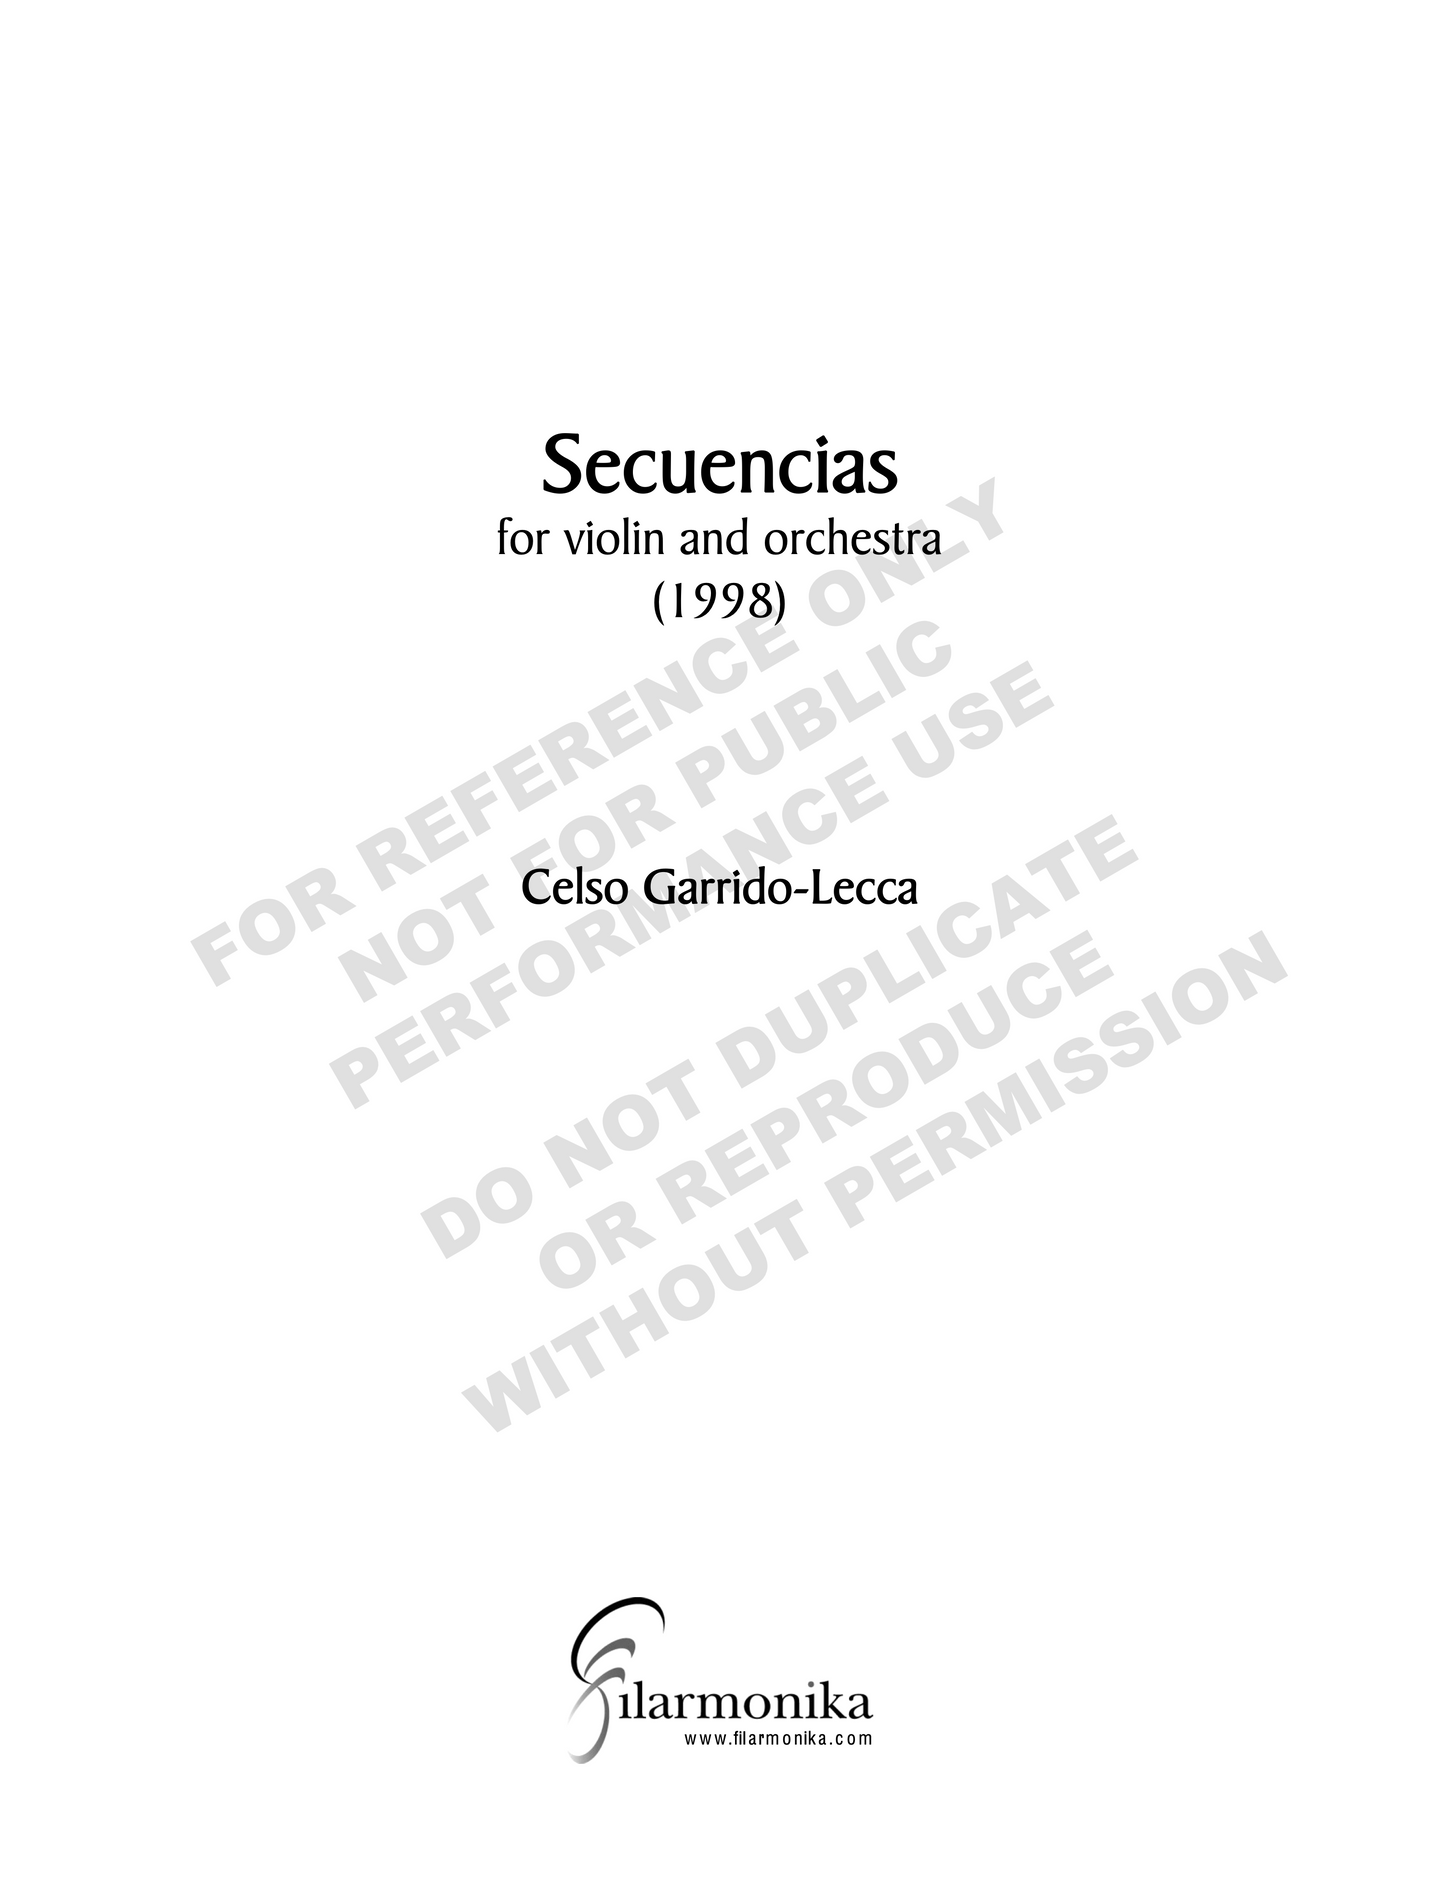 Secuencias, for violin and orchestra